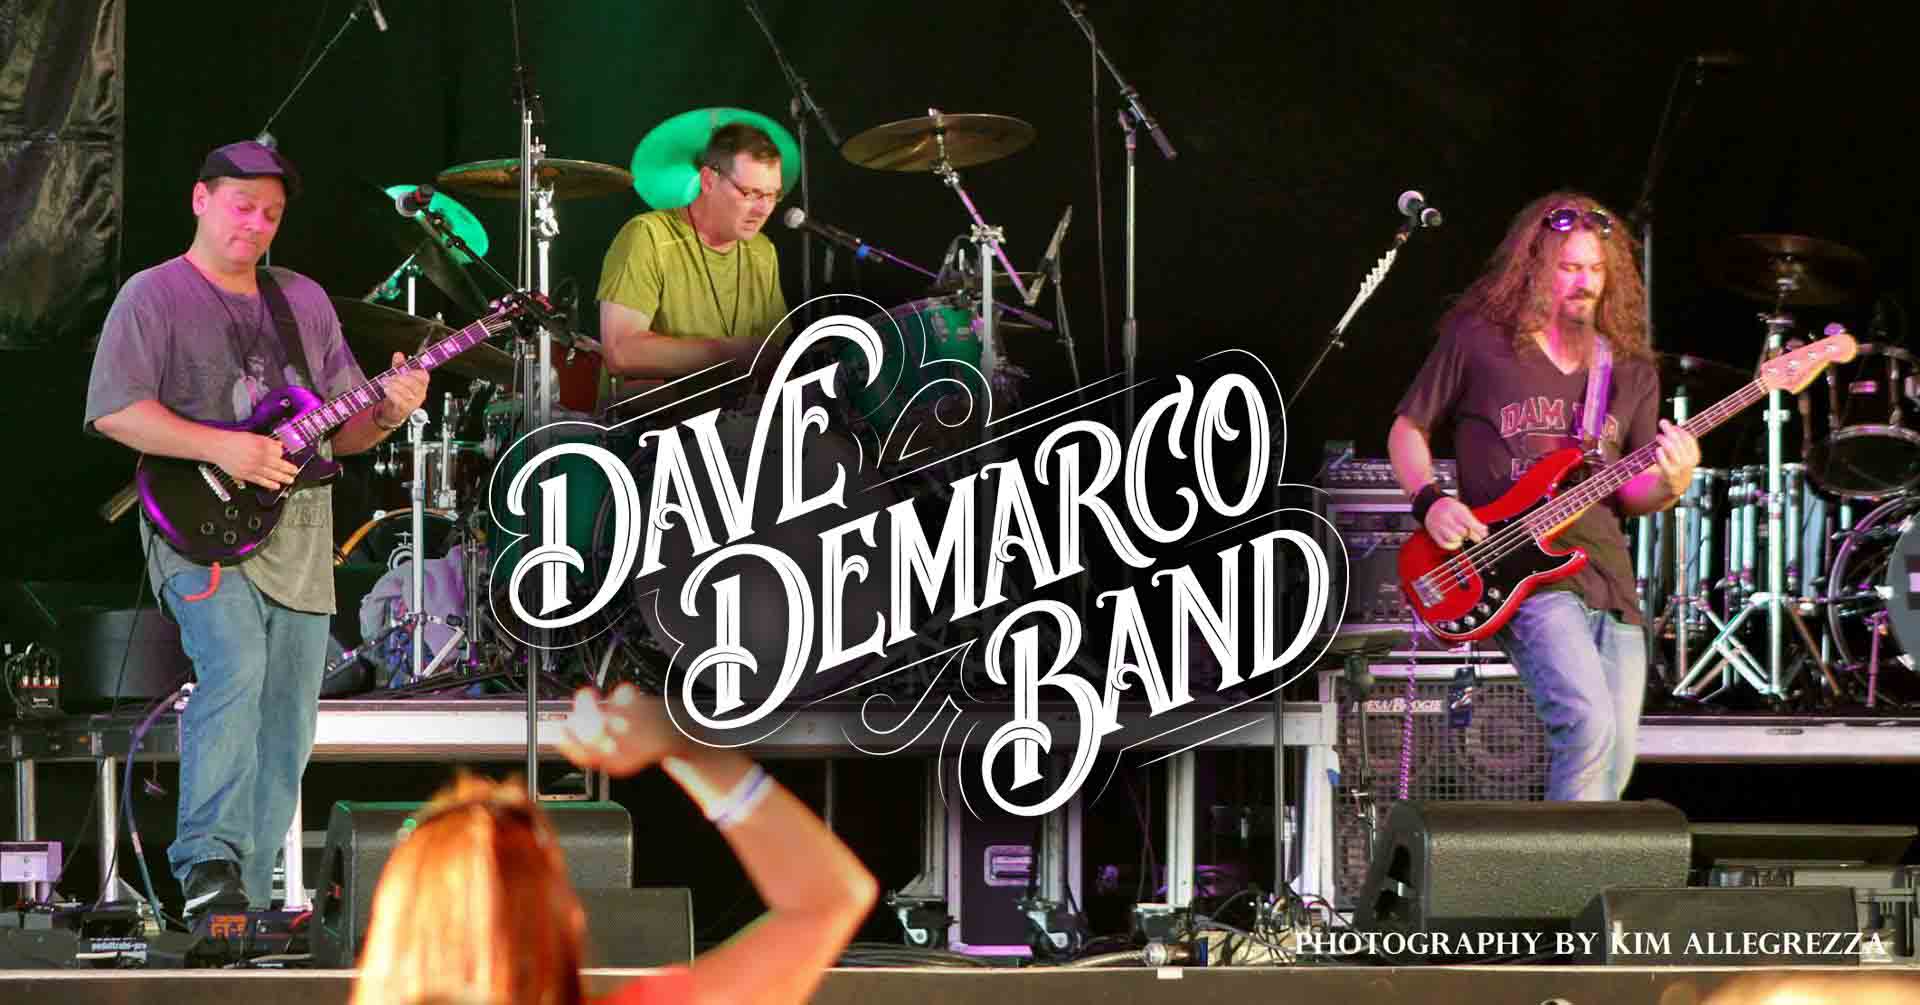 Dave Demarco Band